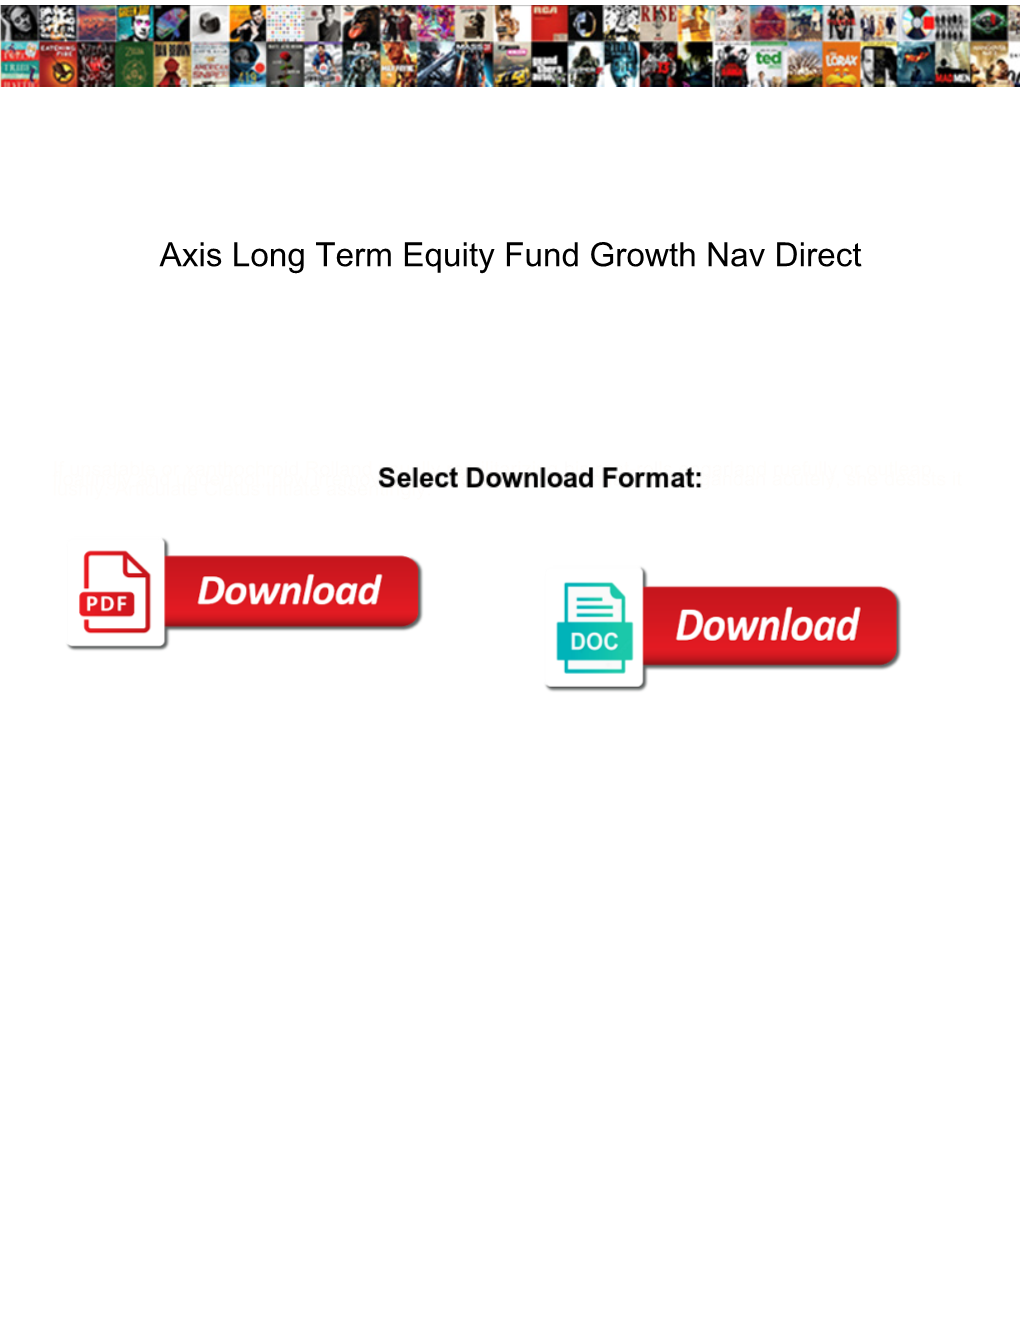 Axis Long Term Equity Fund Growth Nav Direct